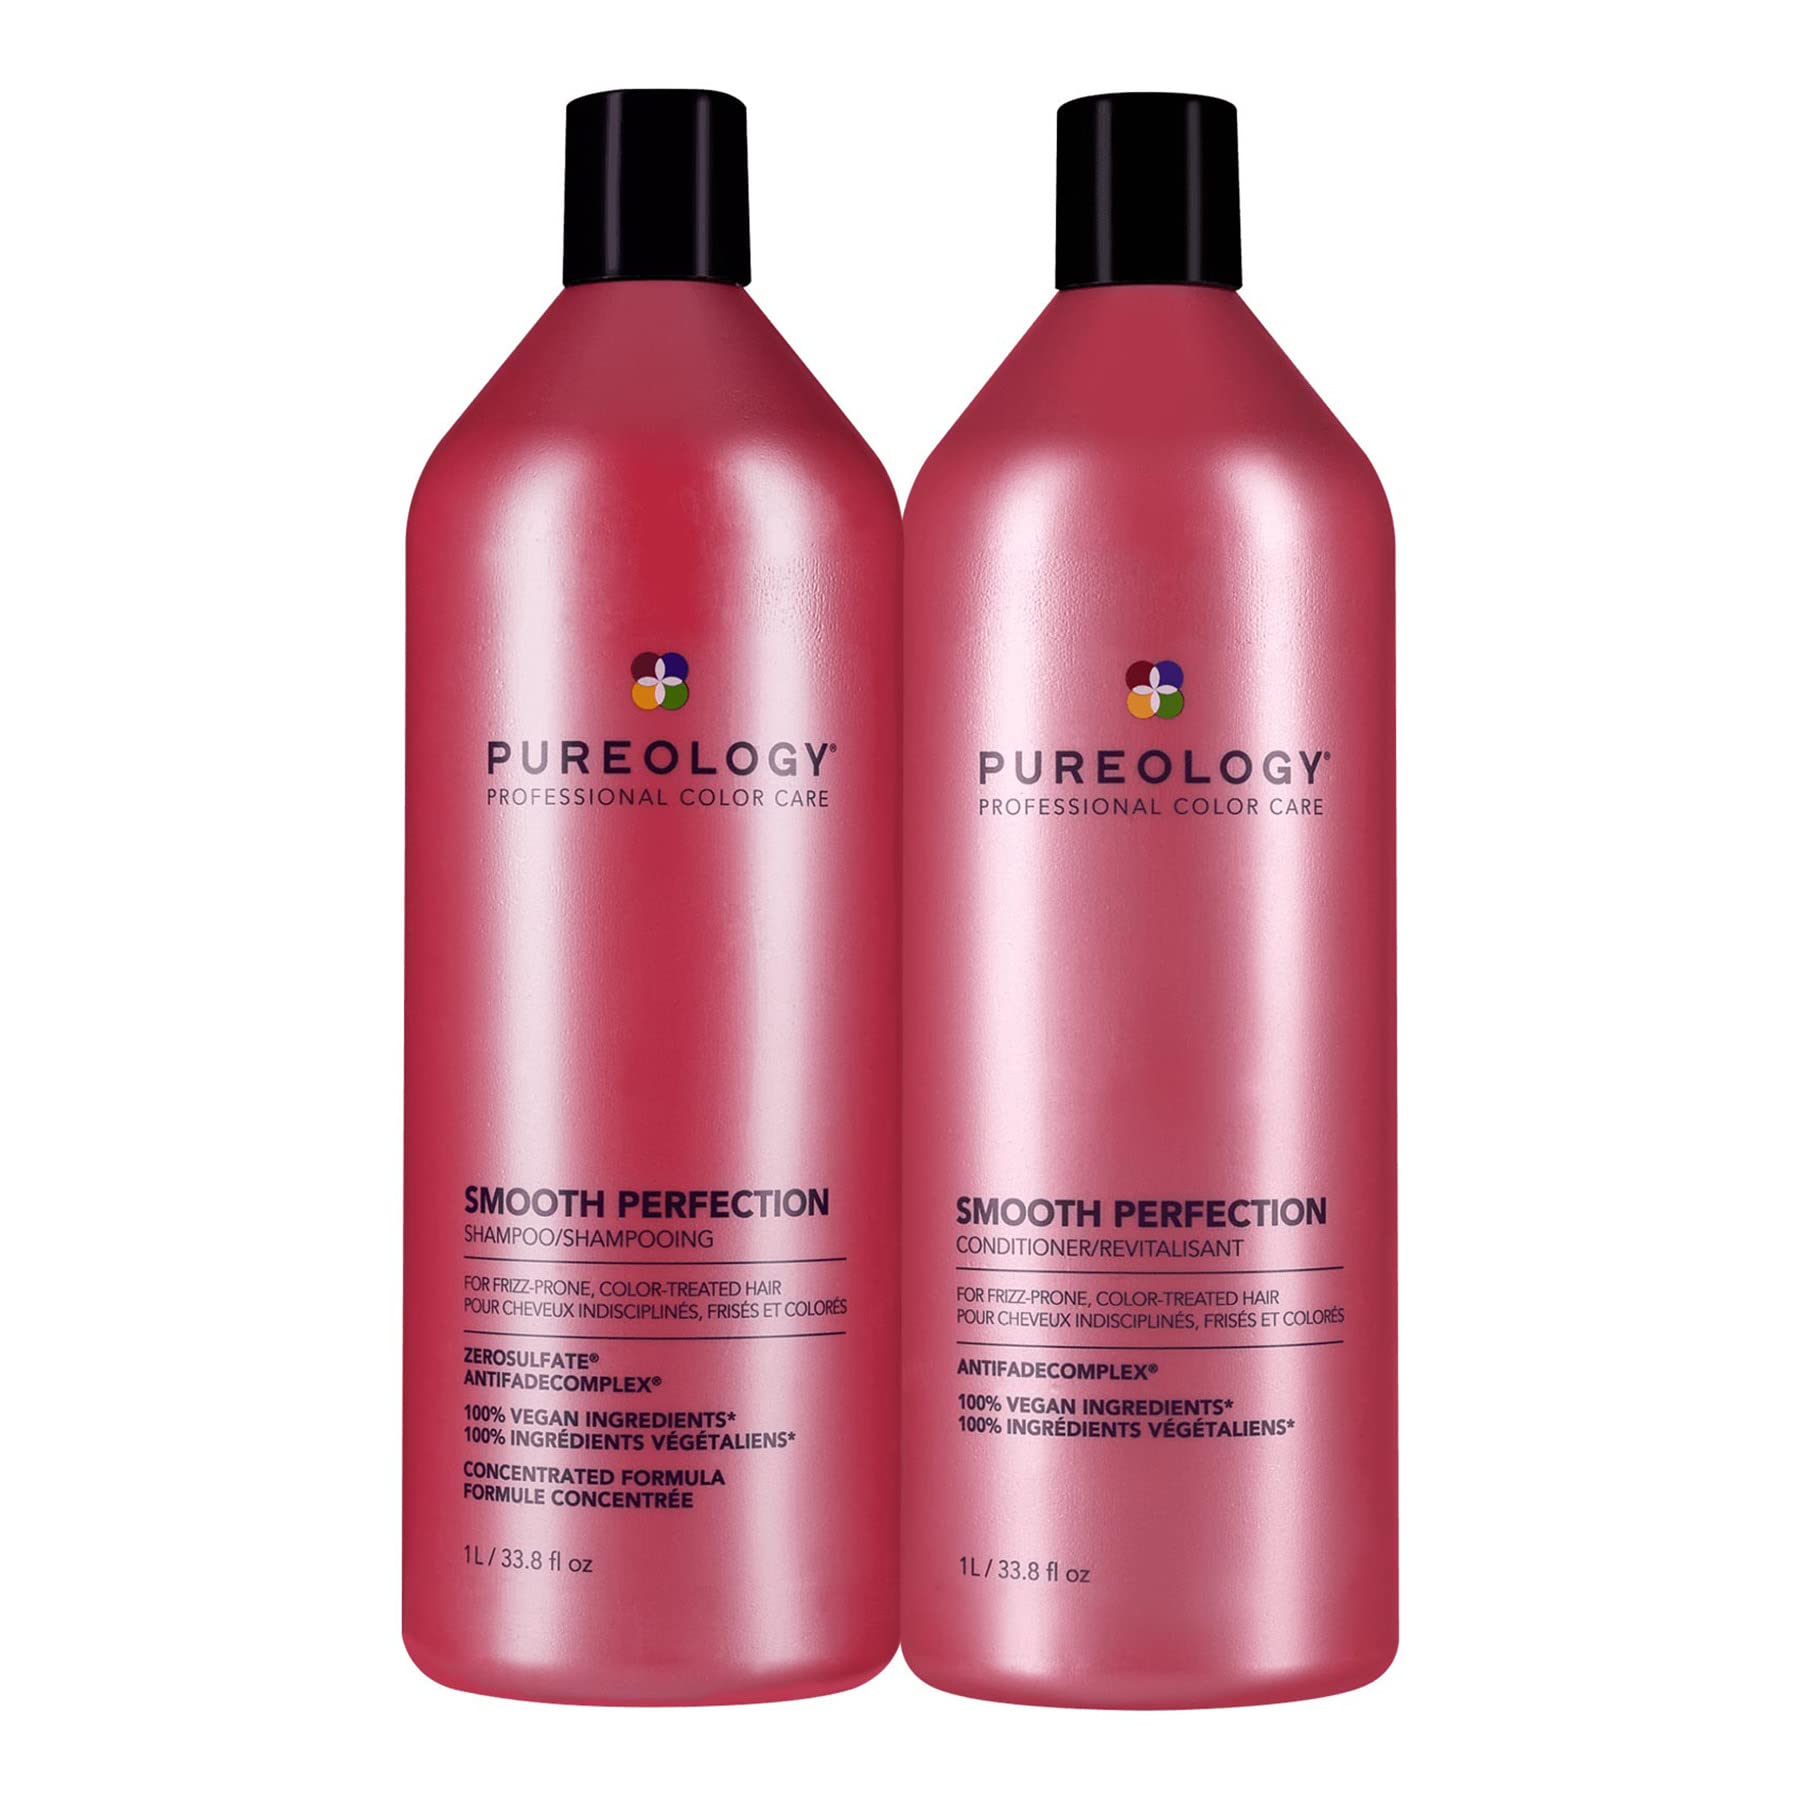 Pureology Smooth Perfection Anti Frizz Shampoo and Conditioner Set | Smooths Hair & Color Safe | Sulfate-Free | Vegan | Paraben-Free